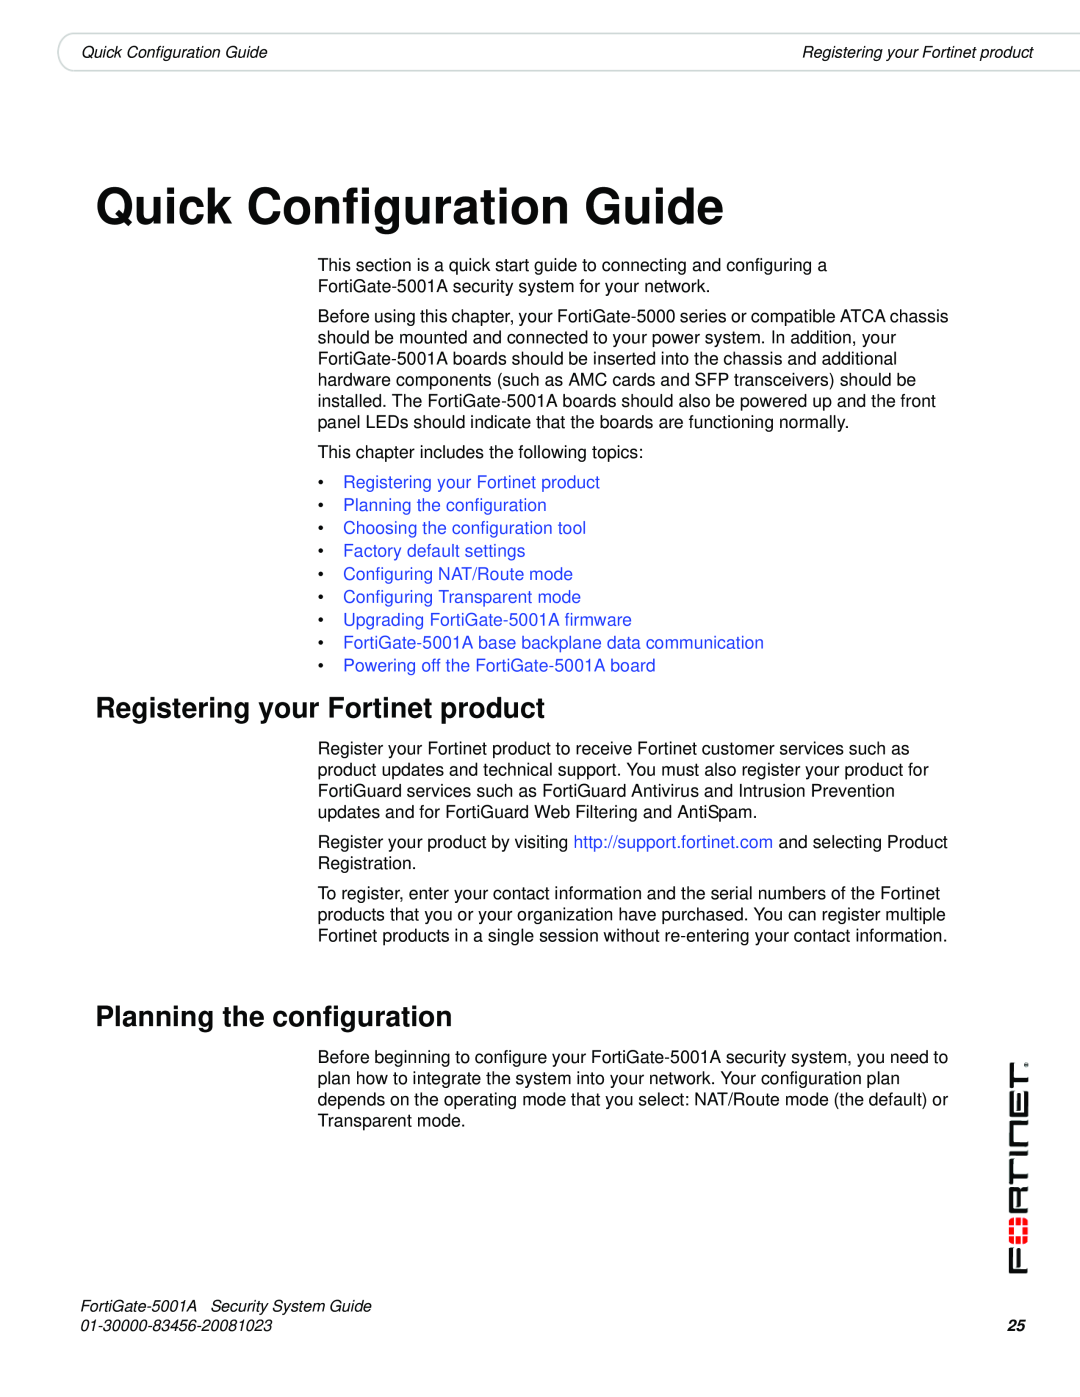 Fortinet 5001A-SW, 5001A-DW manual Quick Configuration Guide, Registering your Fortinet product, Planning the configuration 